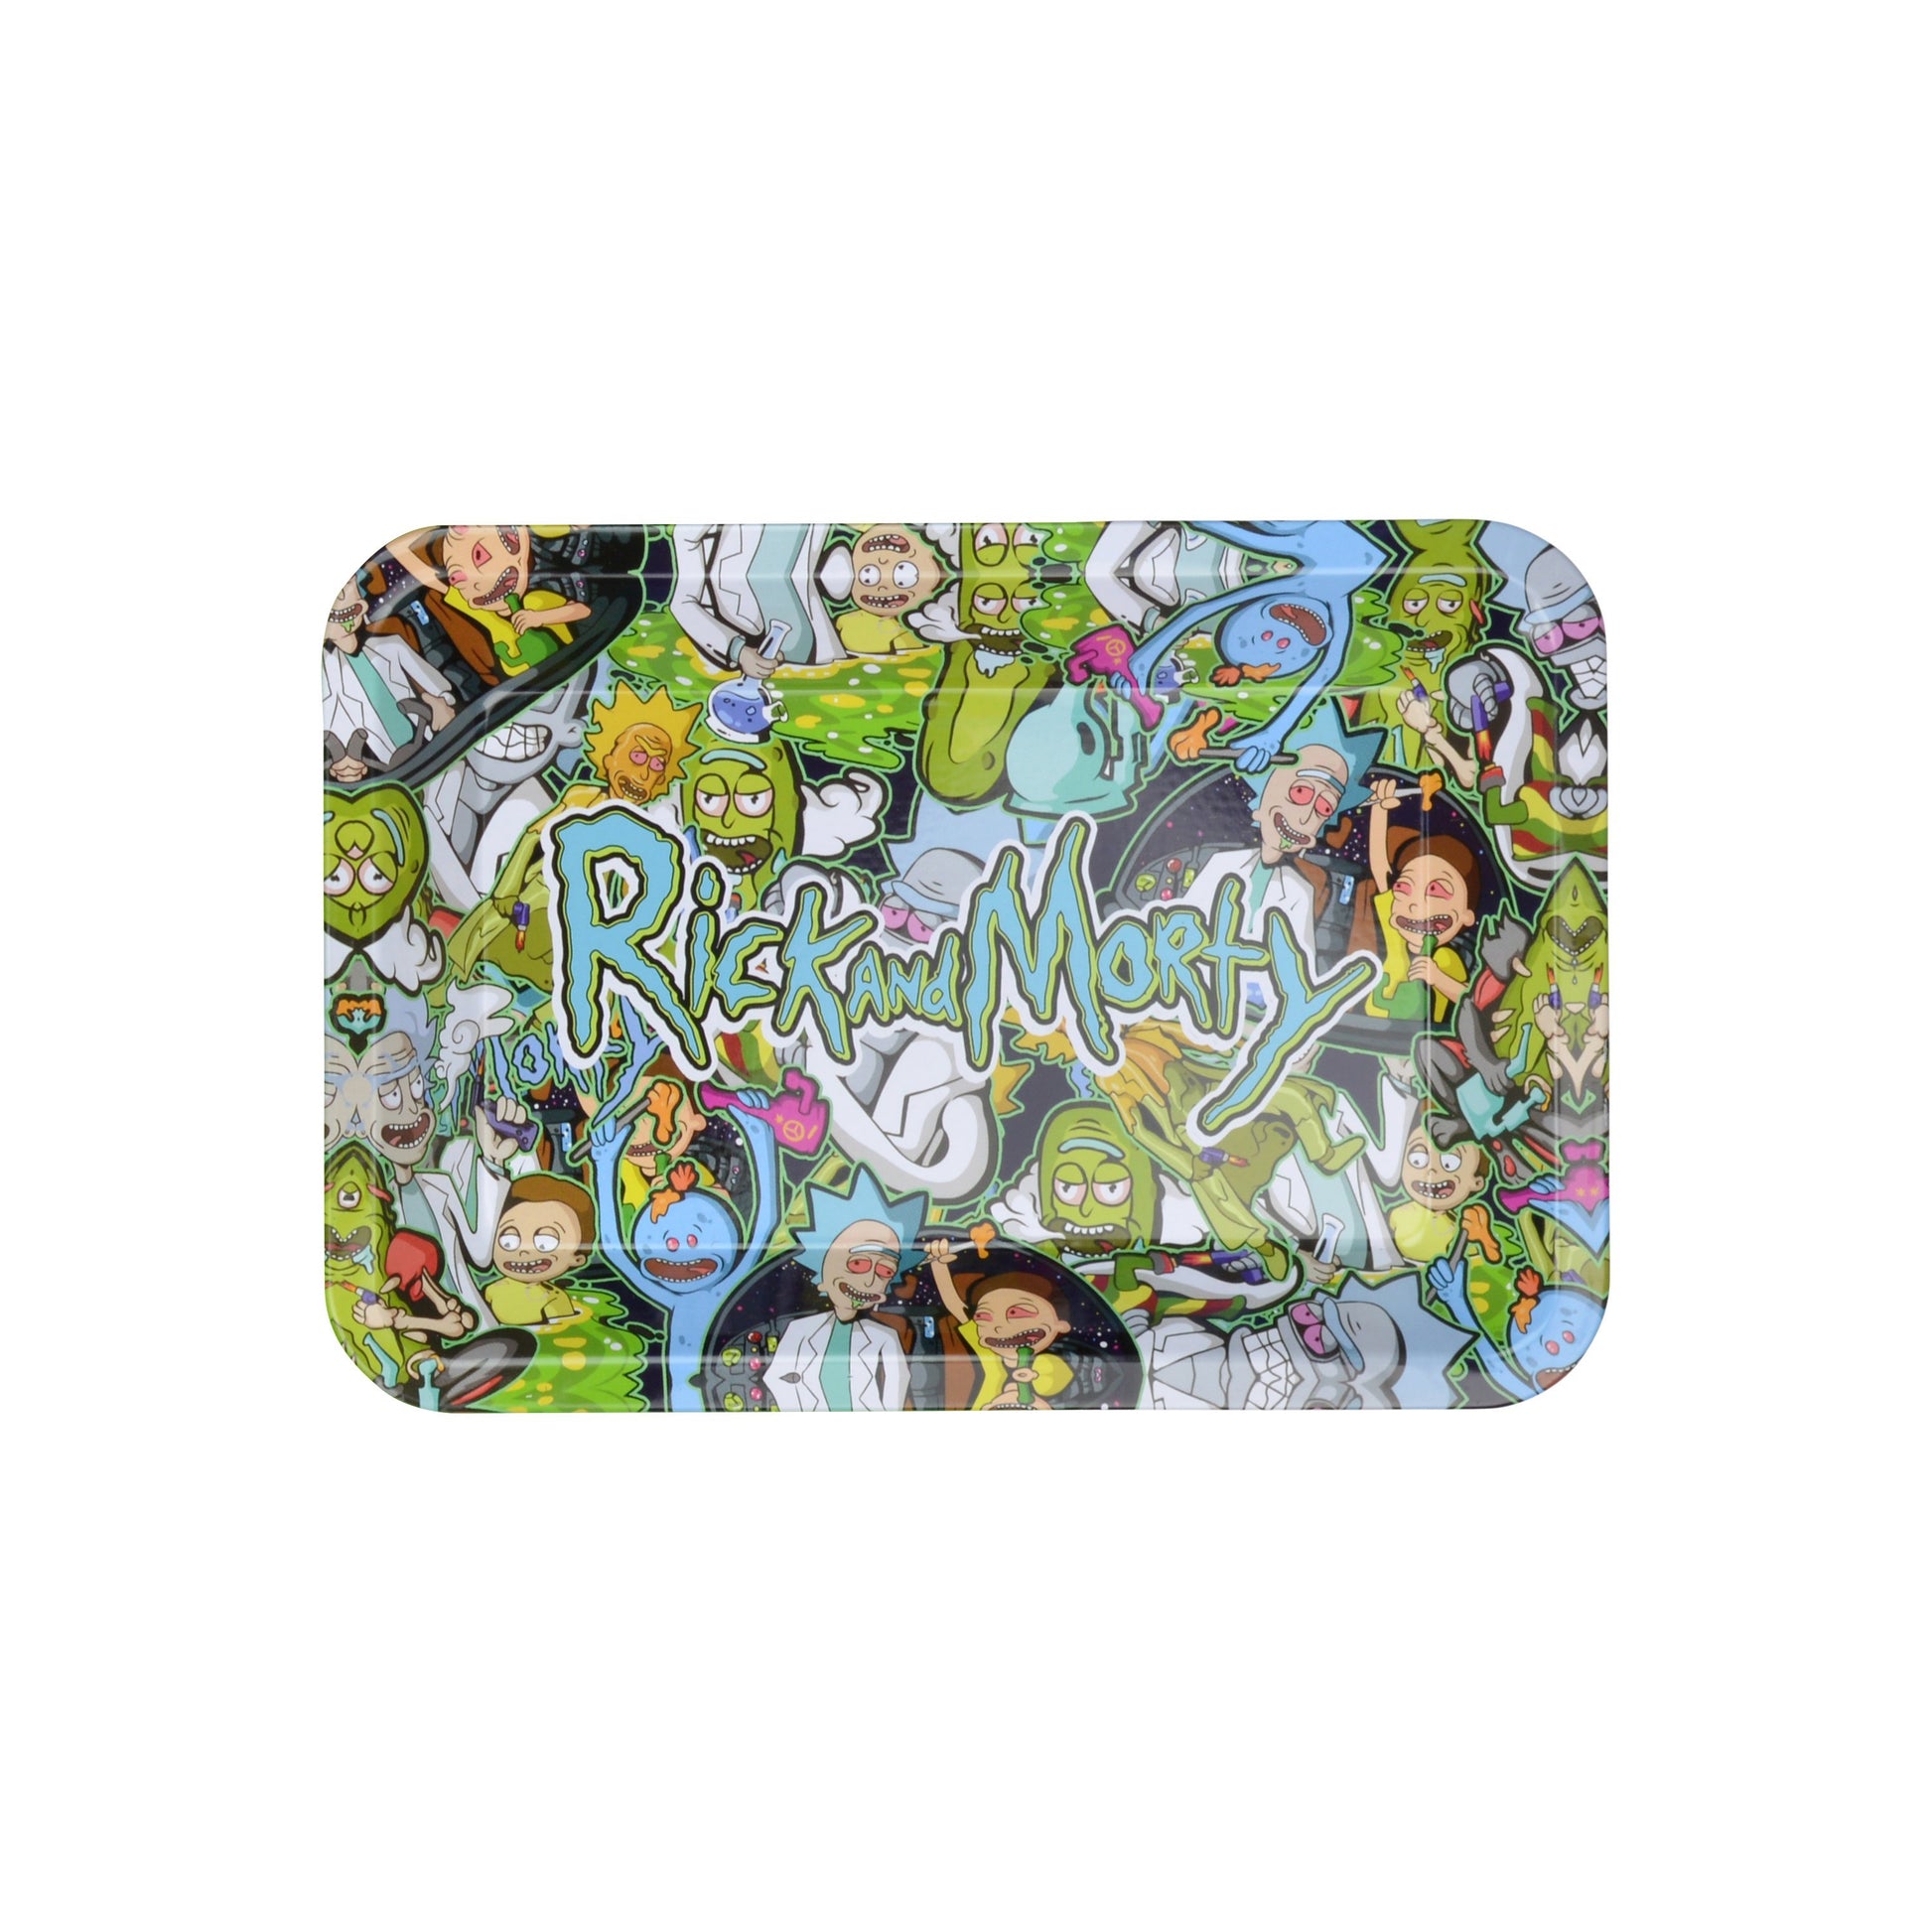 Top full shot of metal rolling tray with wacky green Rick and Morty word RnM characters smoking pot design